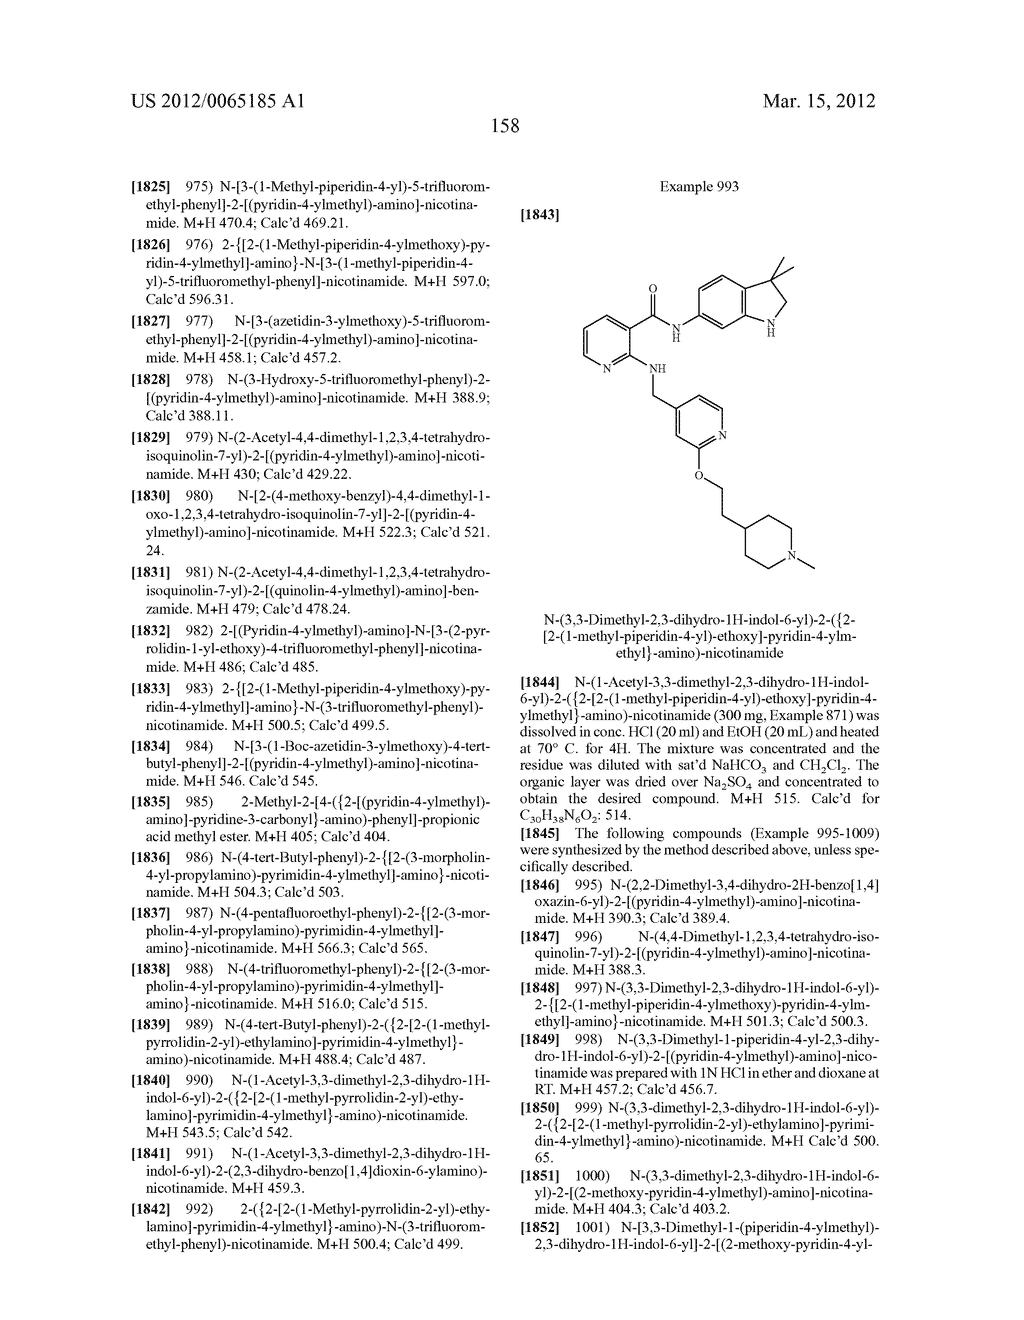 SUBSTITUTED ALKYLAMINE DERIVATIVES AND METHODS OF USE - diagram, schematic, and image 159